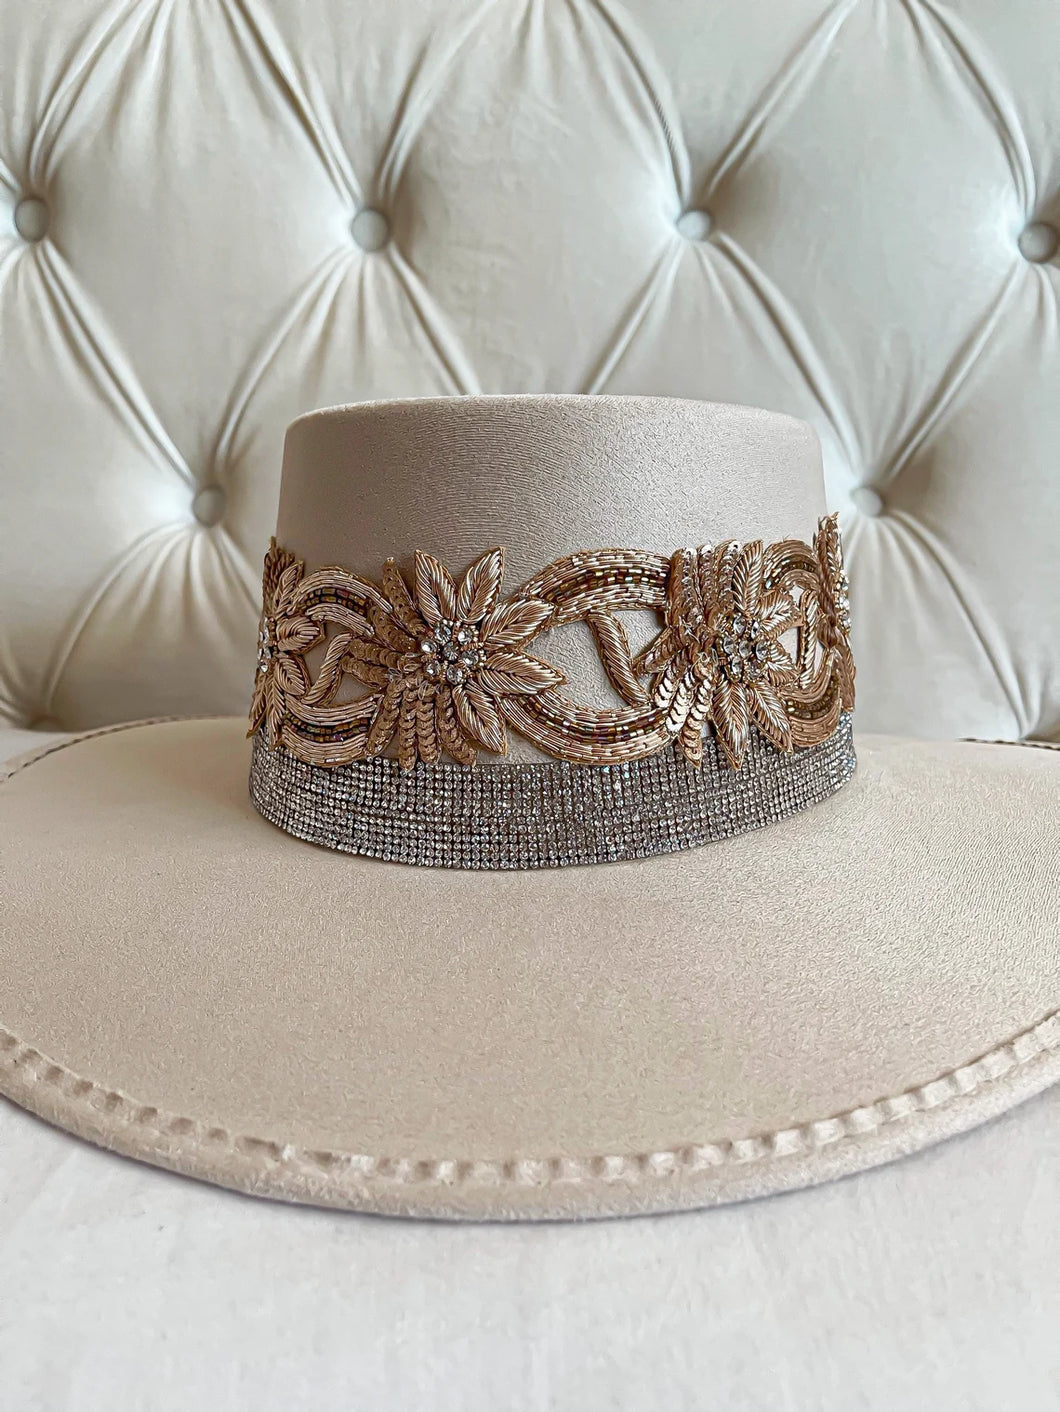 Bridal collection luxury boater hat “THE BRIDE” in ivory/gold/silver